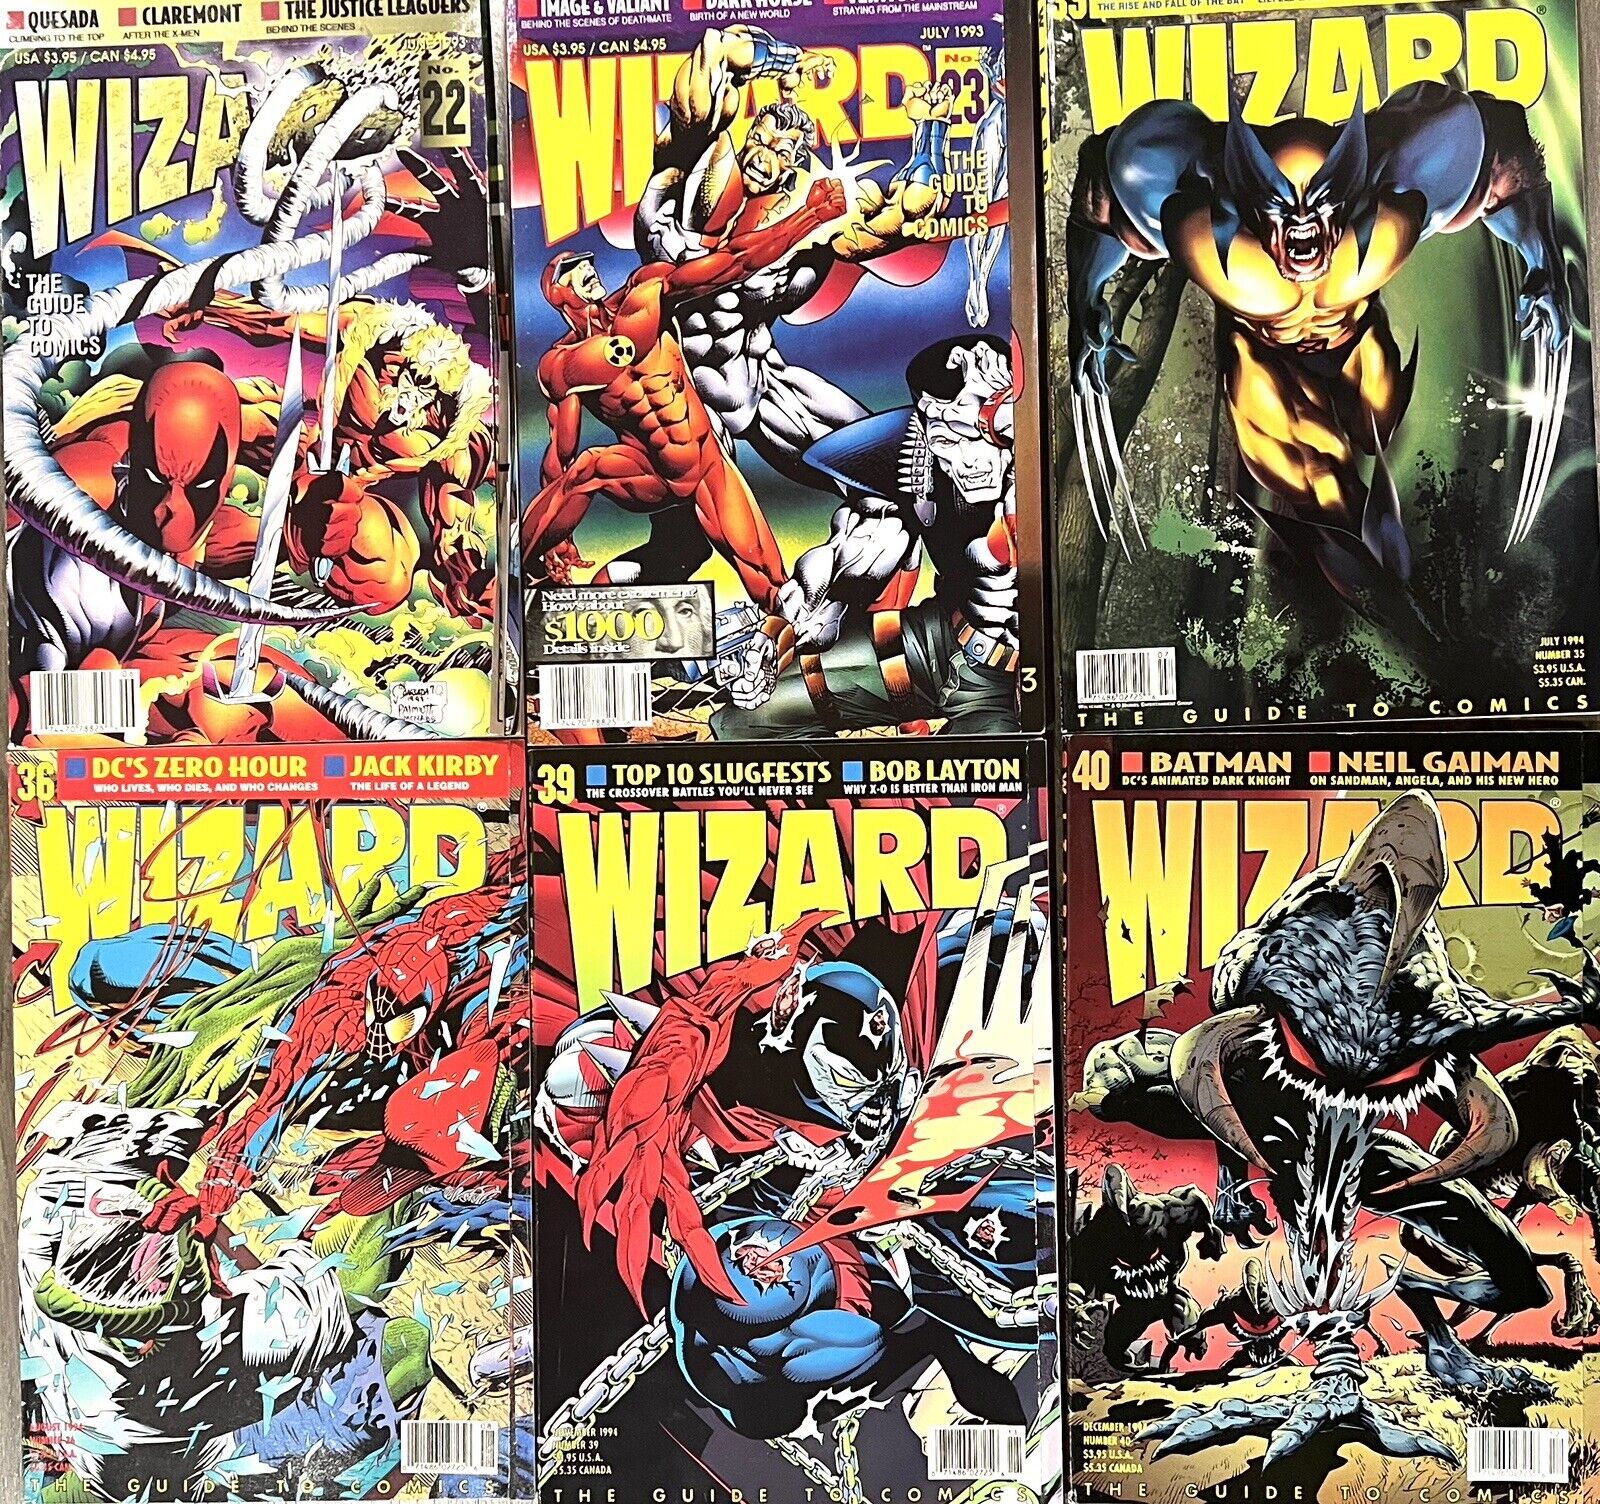 Lot Of 6 WIZARD GUIDE TO COMICS MAGAZINES Spawn, Deadpool, Spider-Man, Wolverine